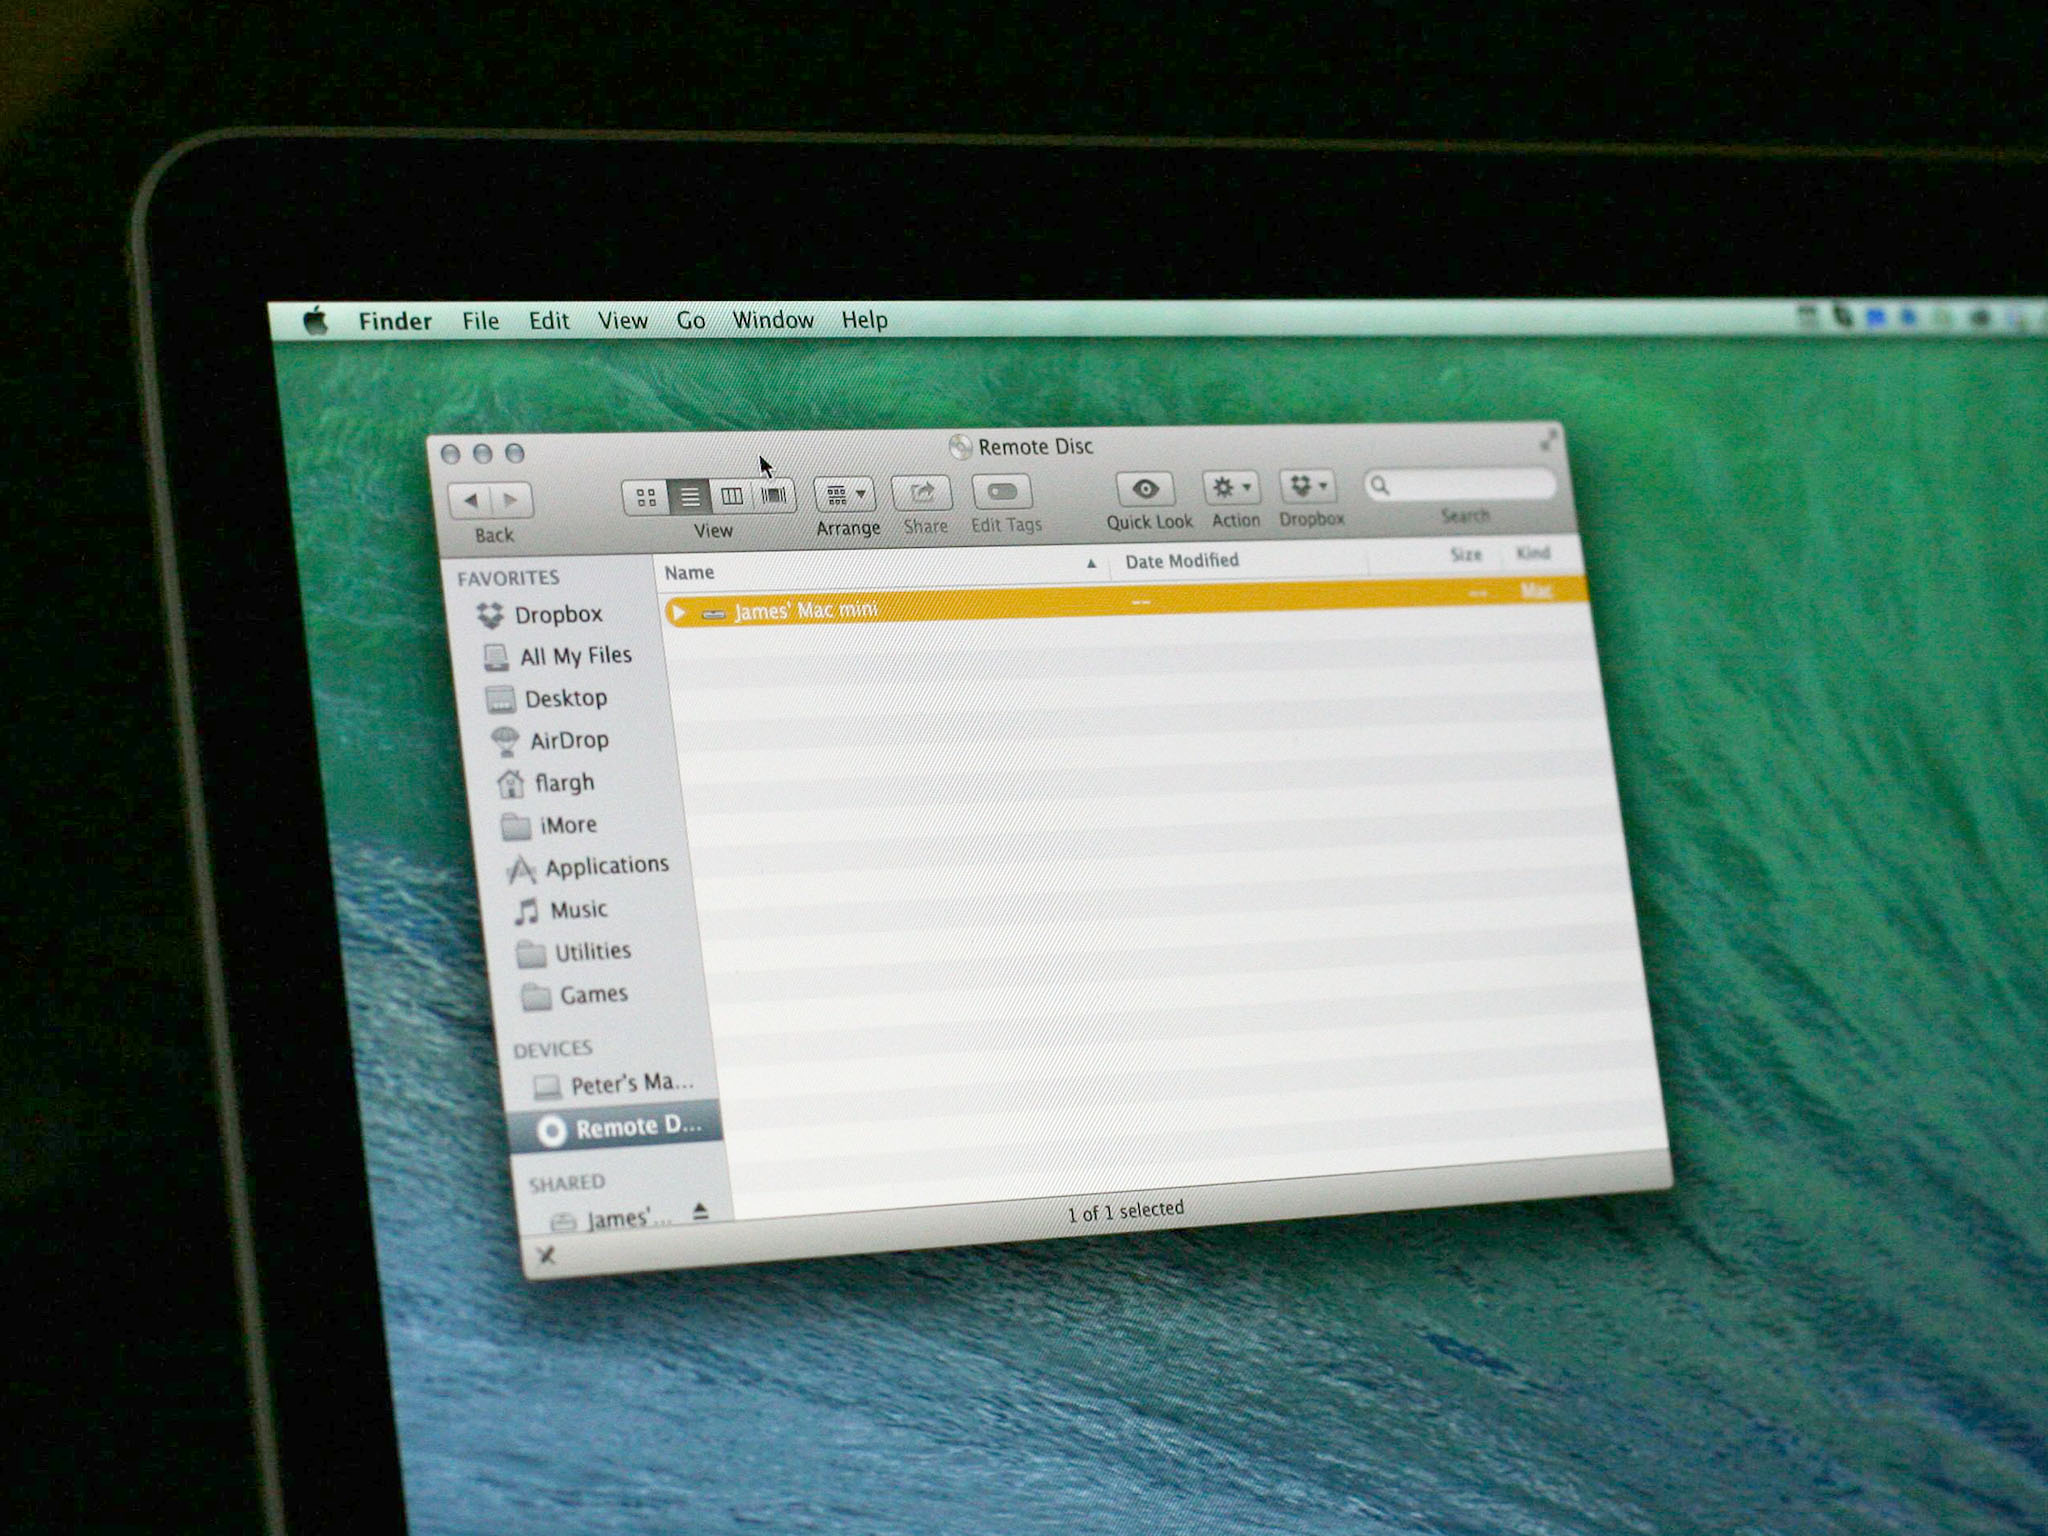 How to use Remote Disc in Mavericks